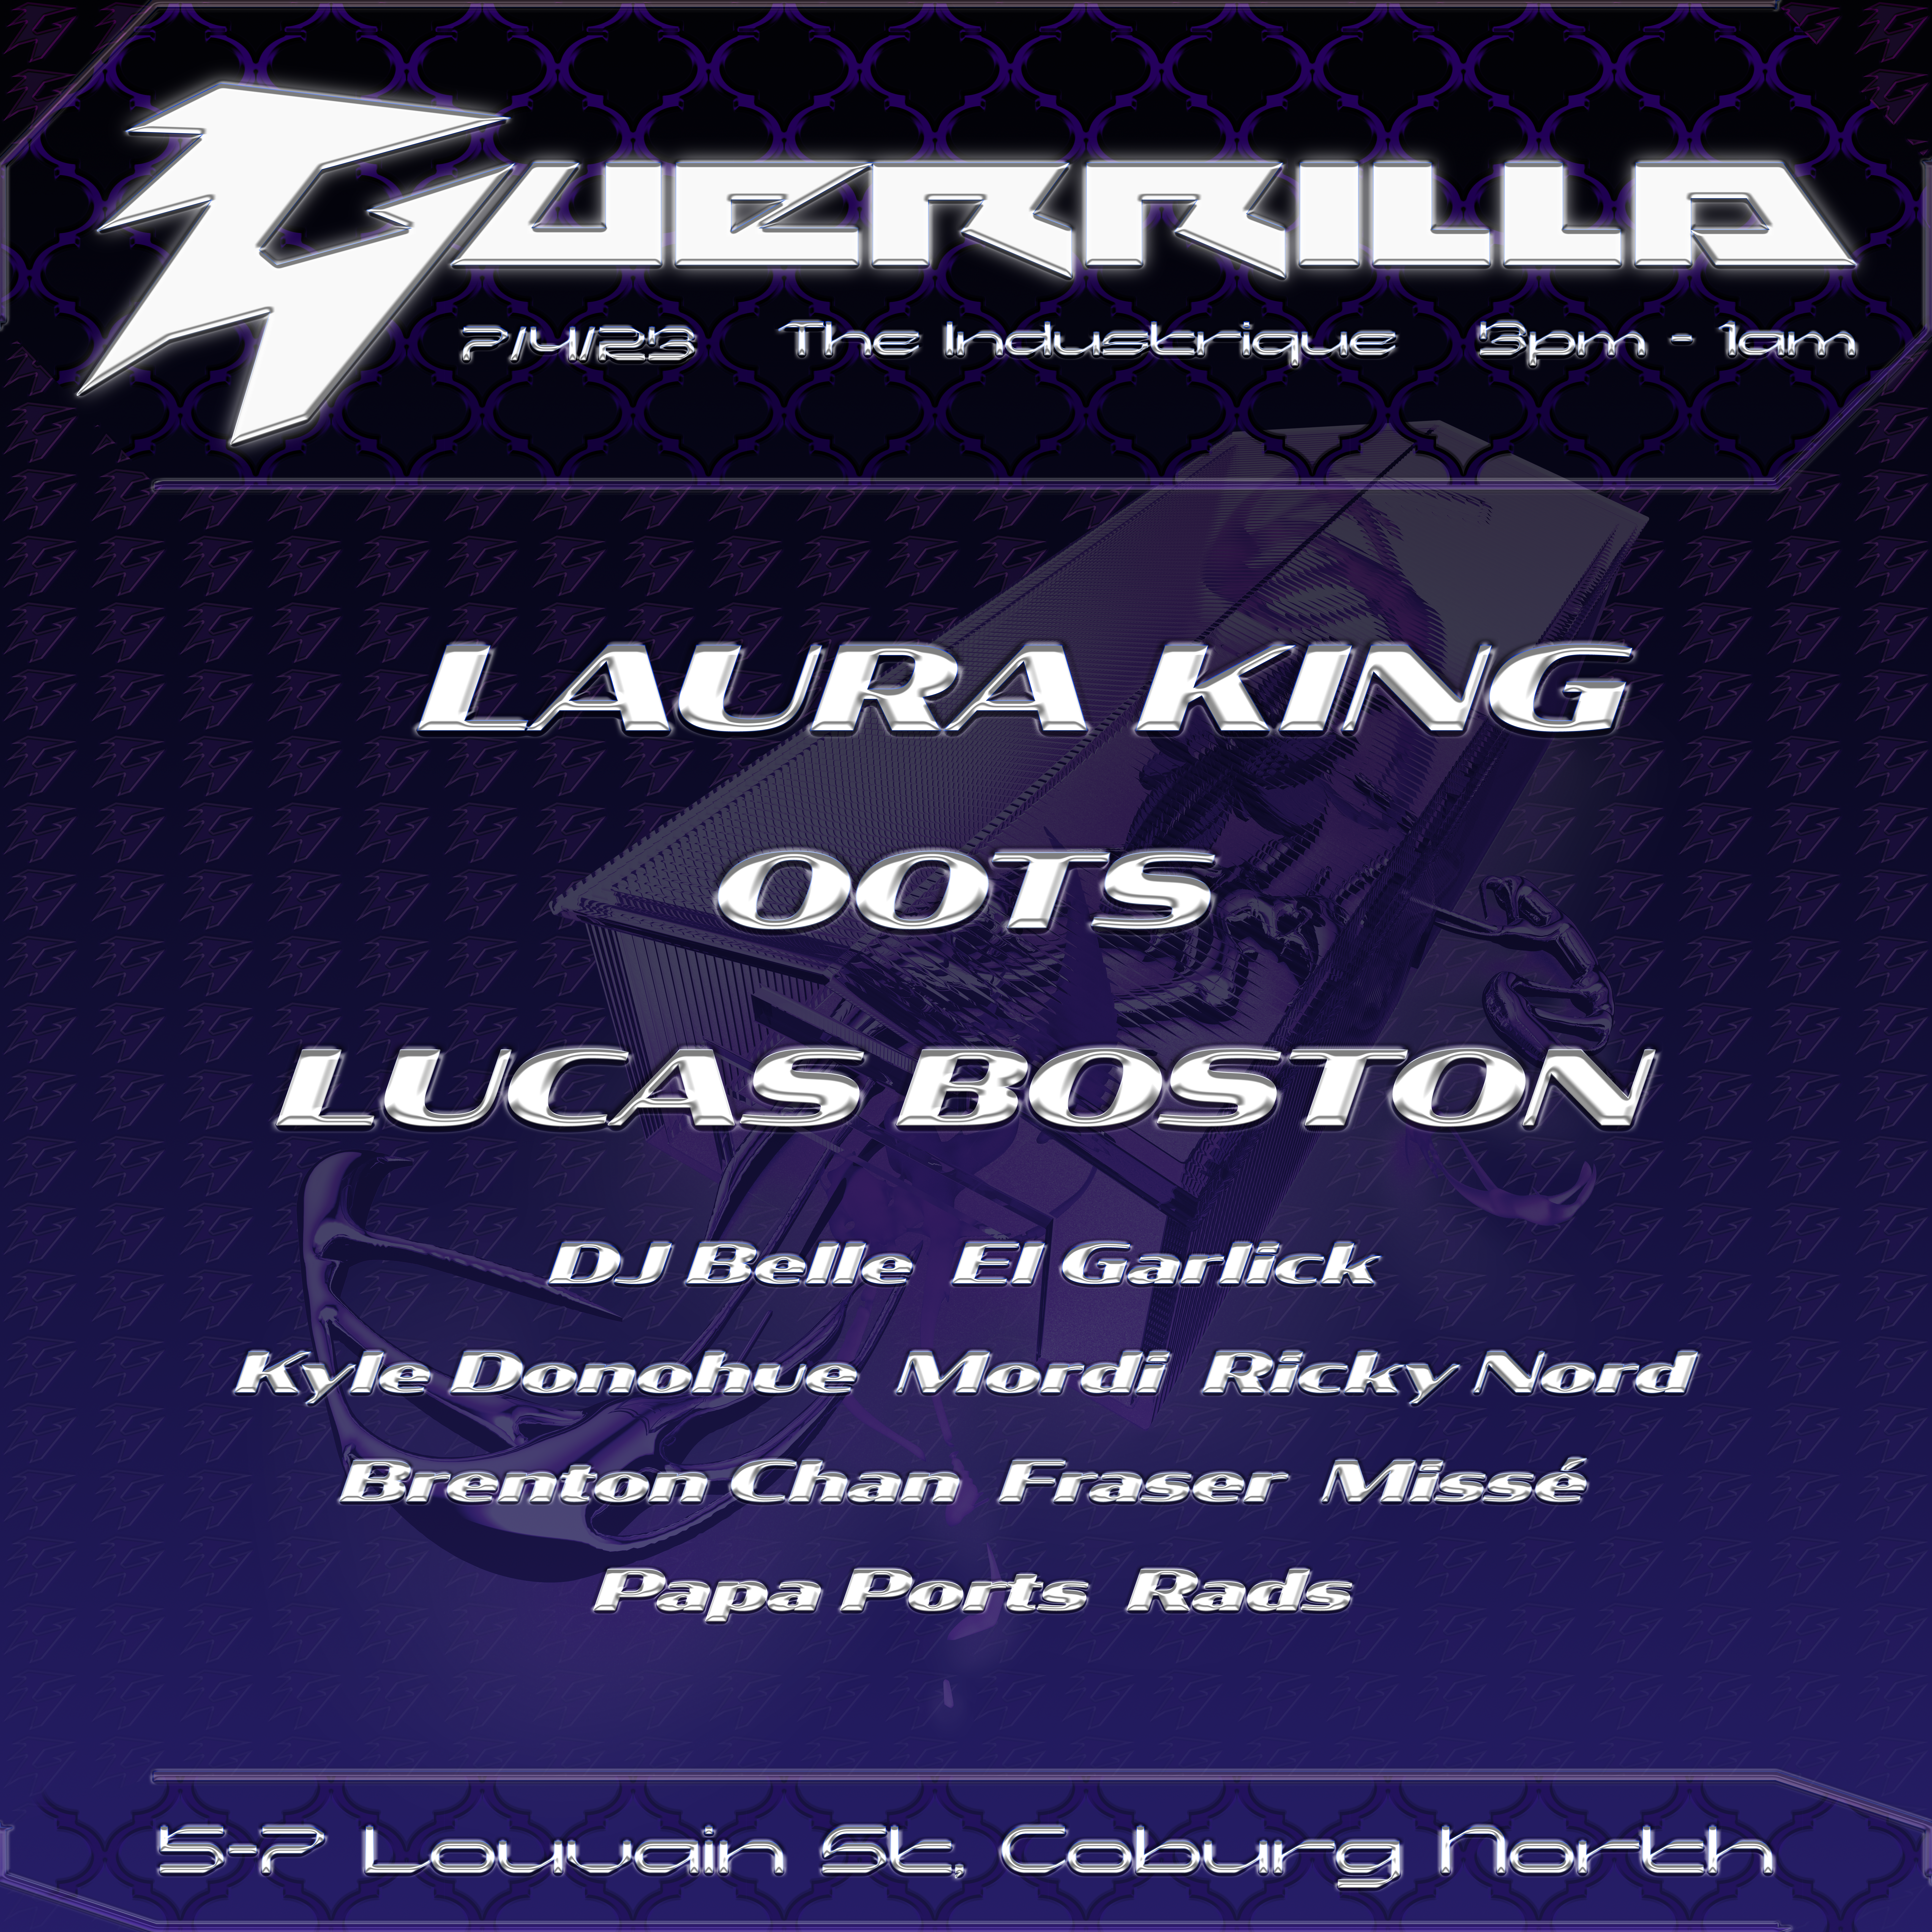 Guerrilla feat. Laura King, Oots, Lucas Boston & More